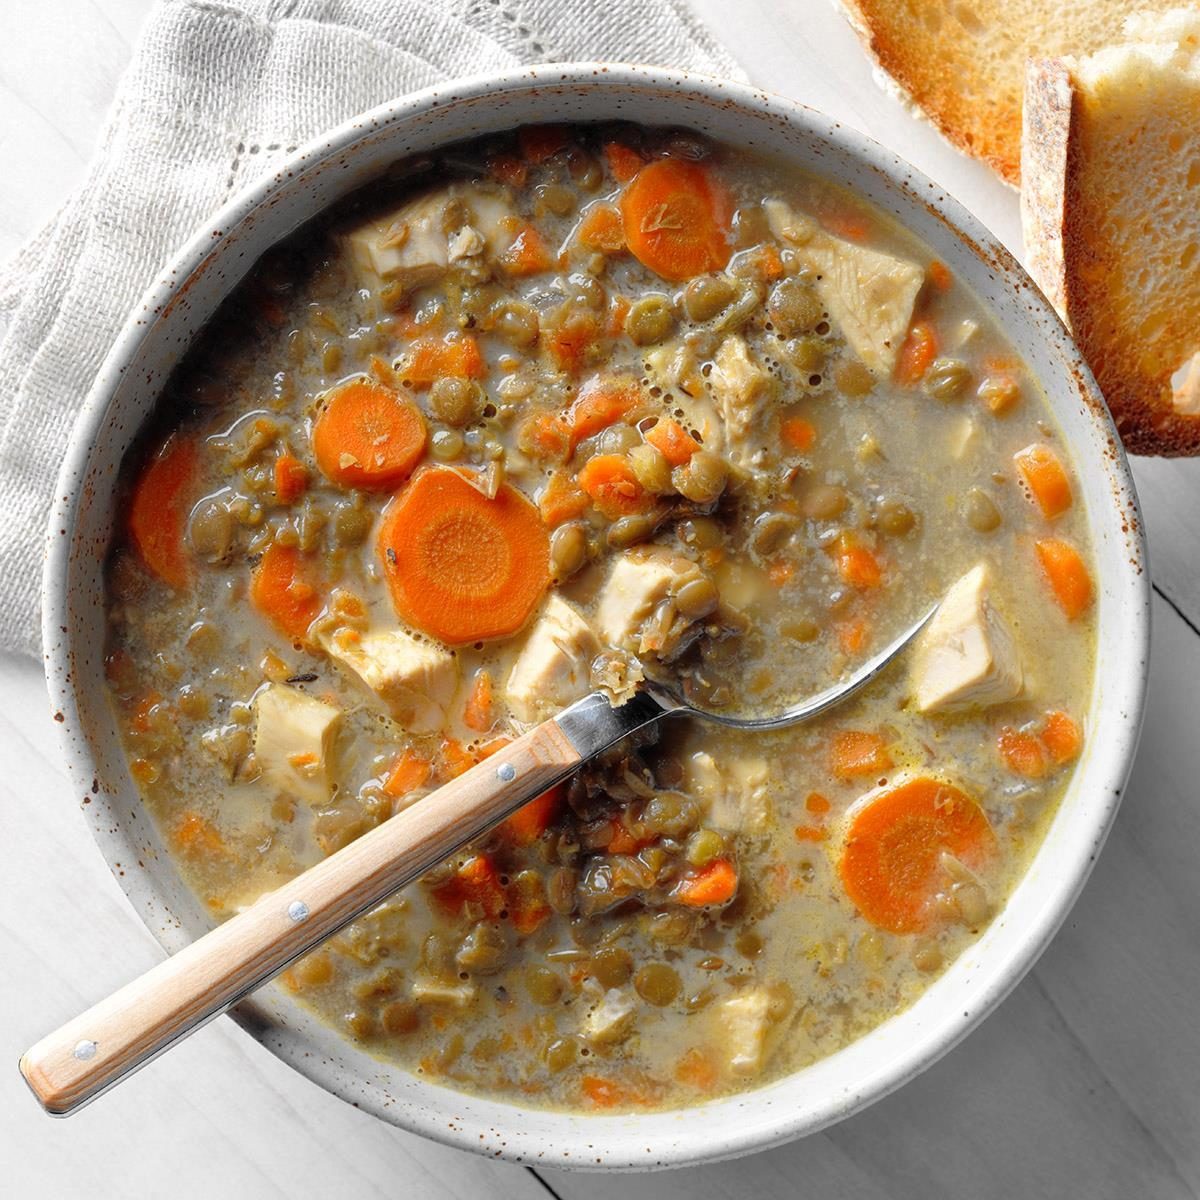 Runner Up: French Lentil and Carrot Soup